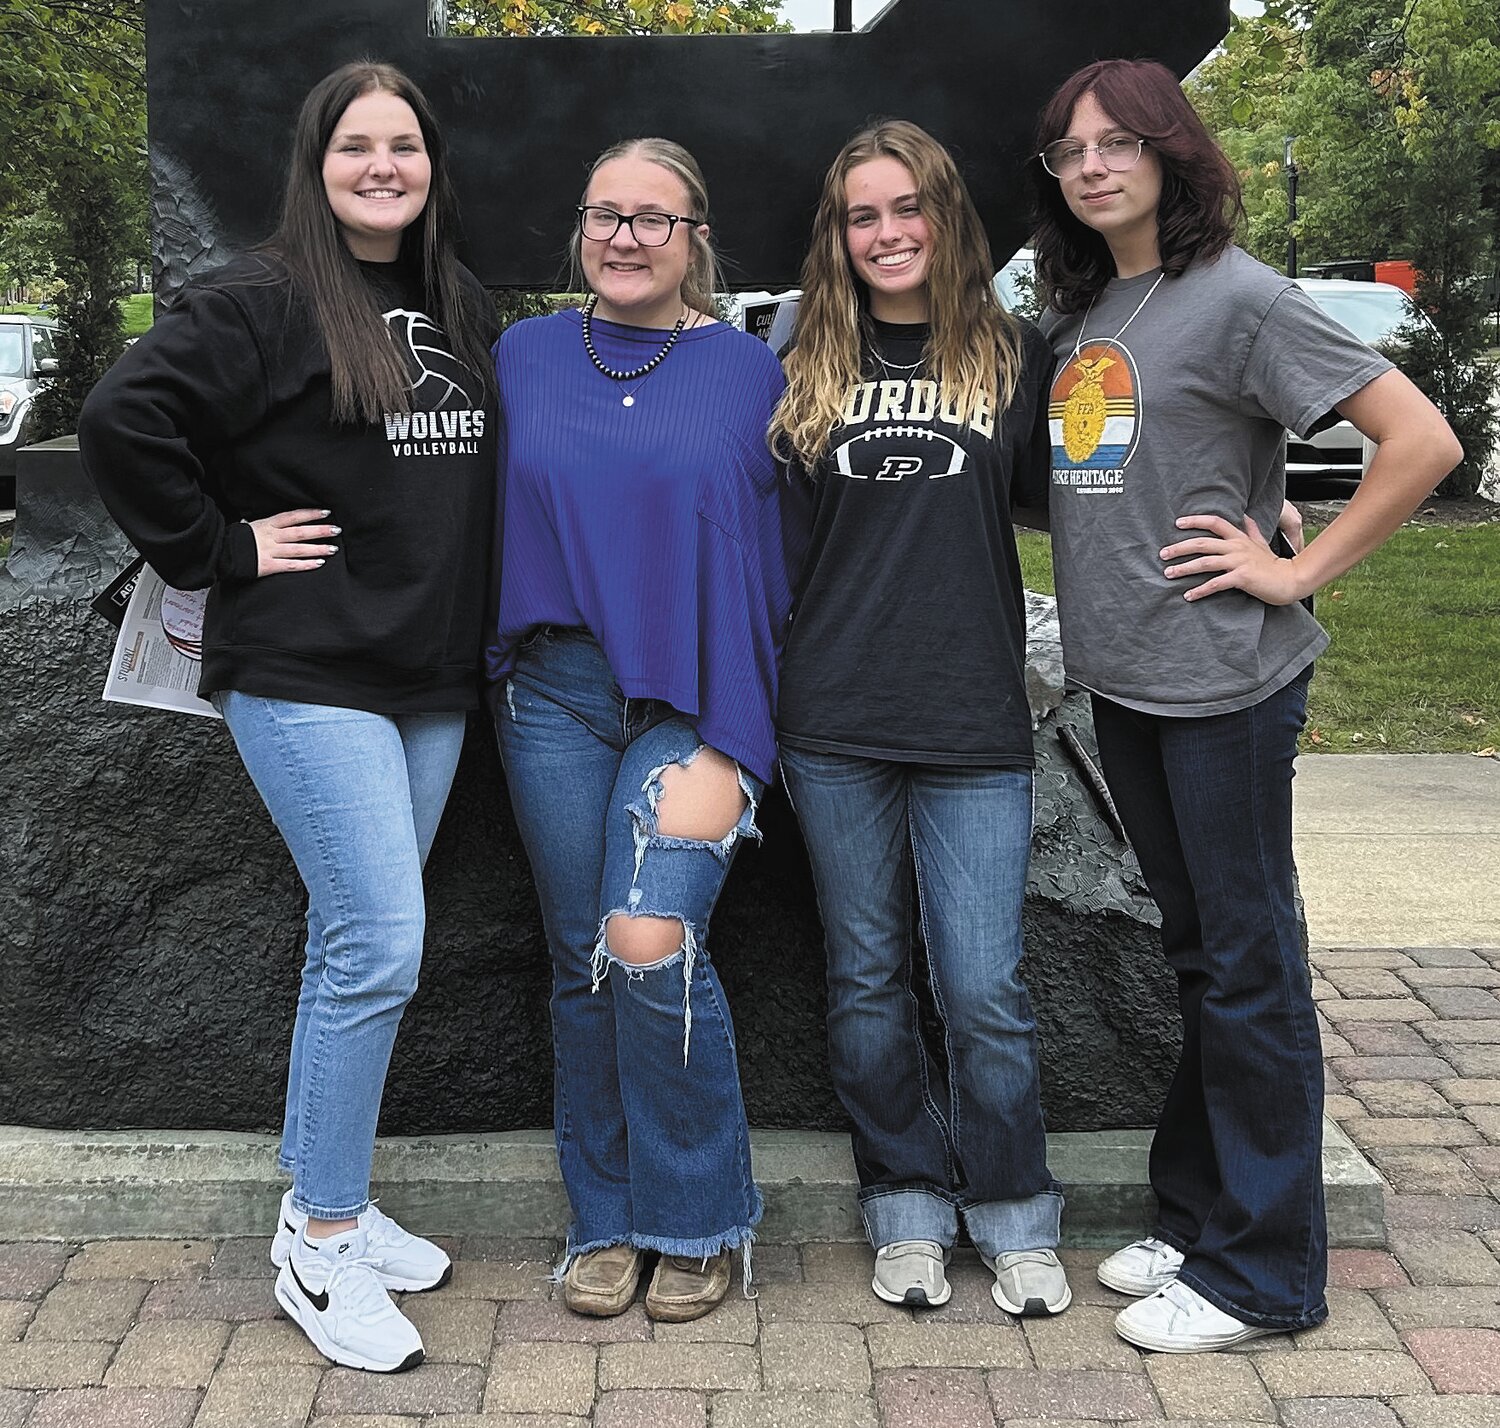 Parke Heritage High School students Paige Bishop, Madison Coleman, Grace Goldner and Will Patton attended the Purdue University Agricultural Sciences Education and Communications Preview Day. They heard about opportunities available in the Agriculture Education and Agriculture Communications Departments, Industry Professionals from both fields, Purdue Office of Academic Programs, completed a Purdue Student Experience room, and were able to ask questions to a panel of current ASEC students. Pictured, from left, are Bishop, Coleman, Goldner and Patton.